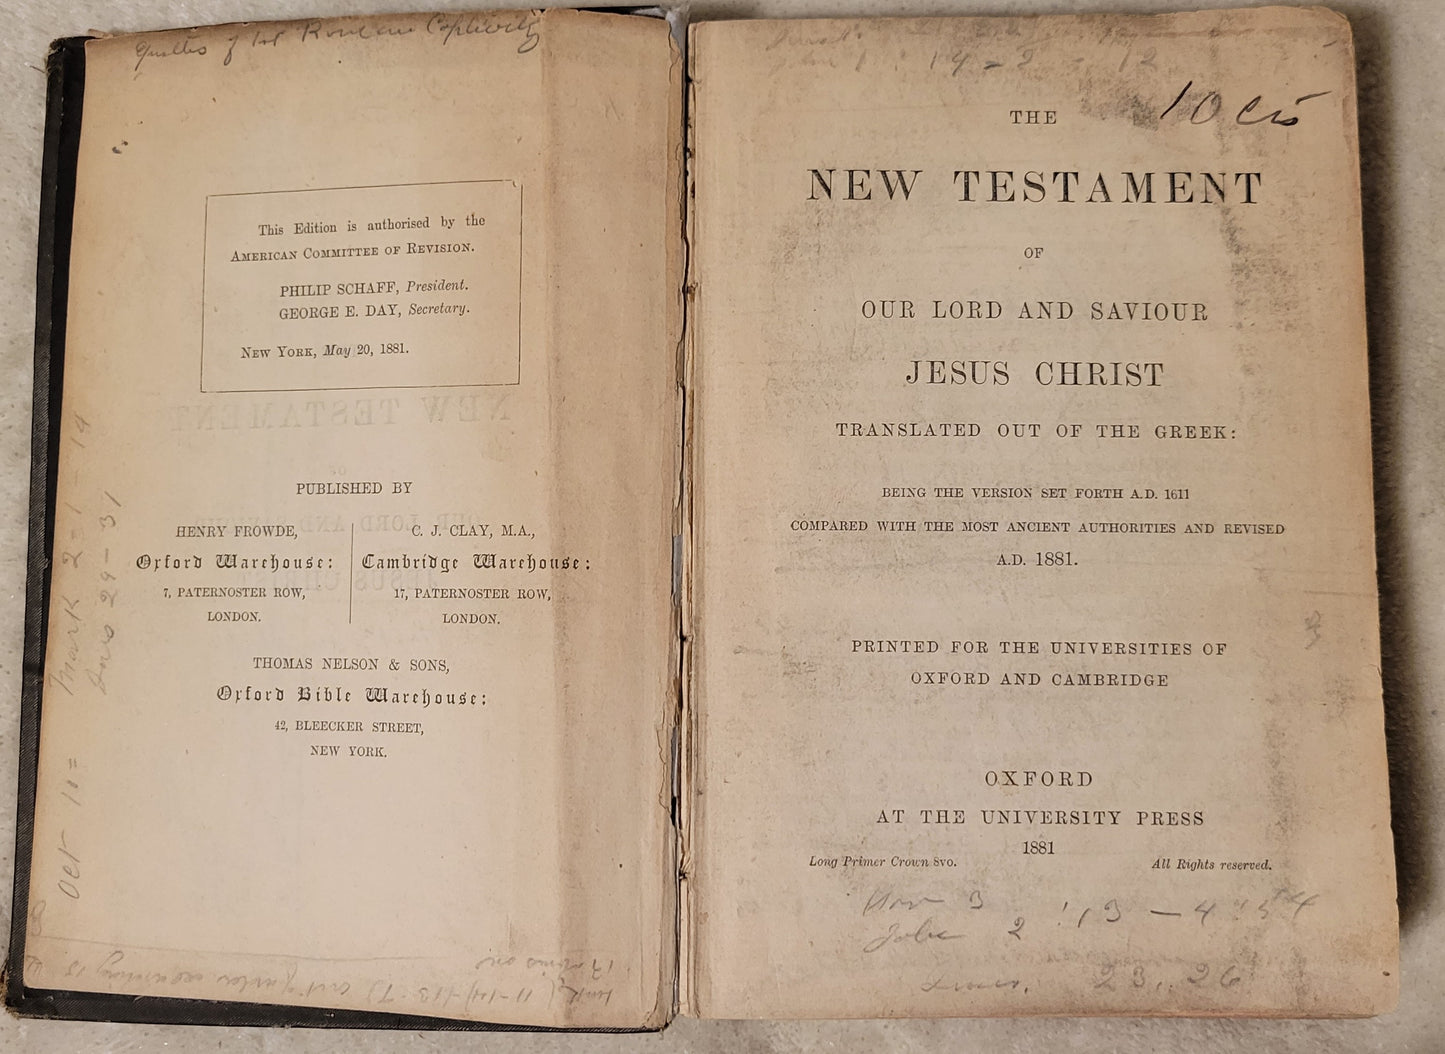 Antique book for sale, "The New Testament of the Our Lord and Saviour Jesus Christ", Oxford University Press, 1881. View of inside title page.